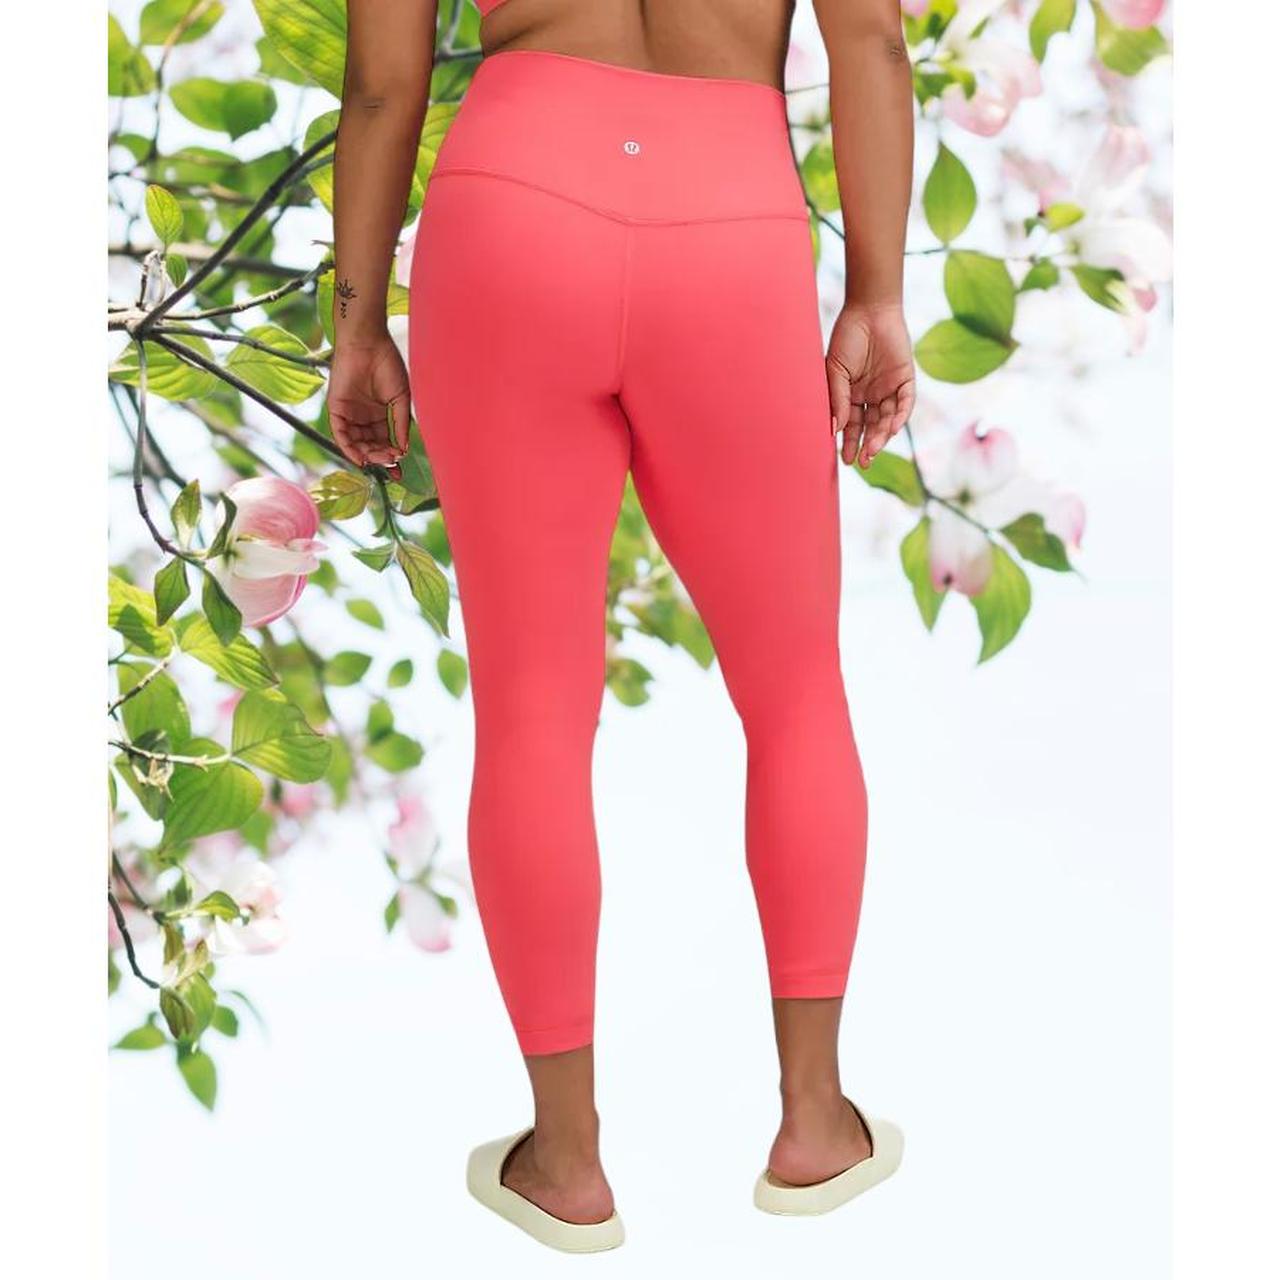 Top 12 Lululemon Must-Haves: Best Joggers, Work Pants, Tank and More -  Parade